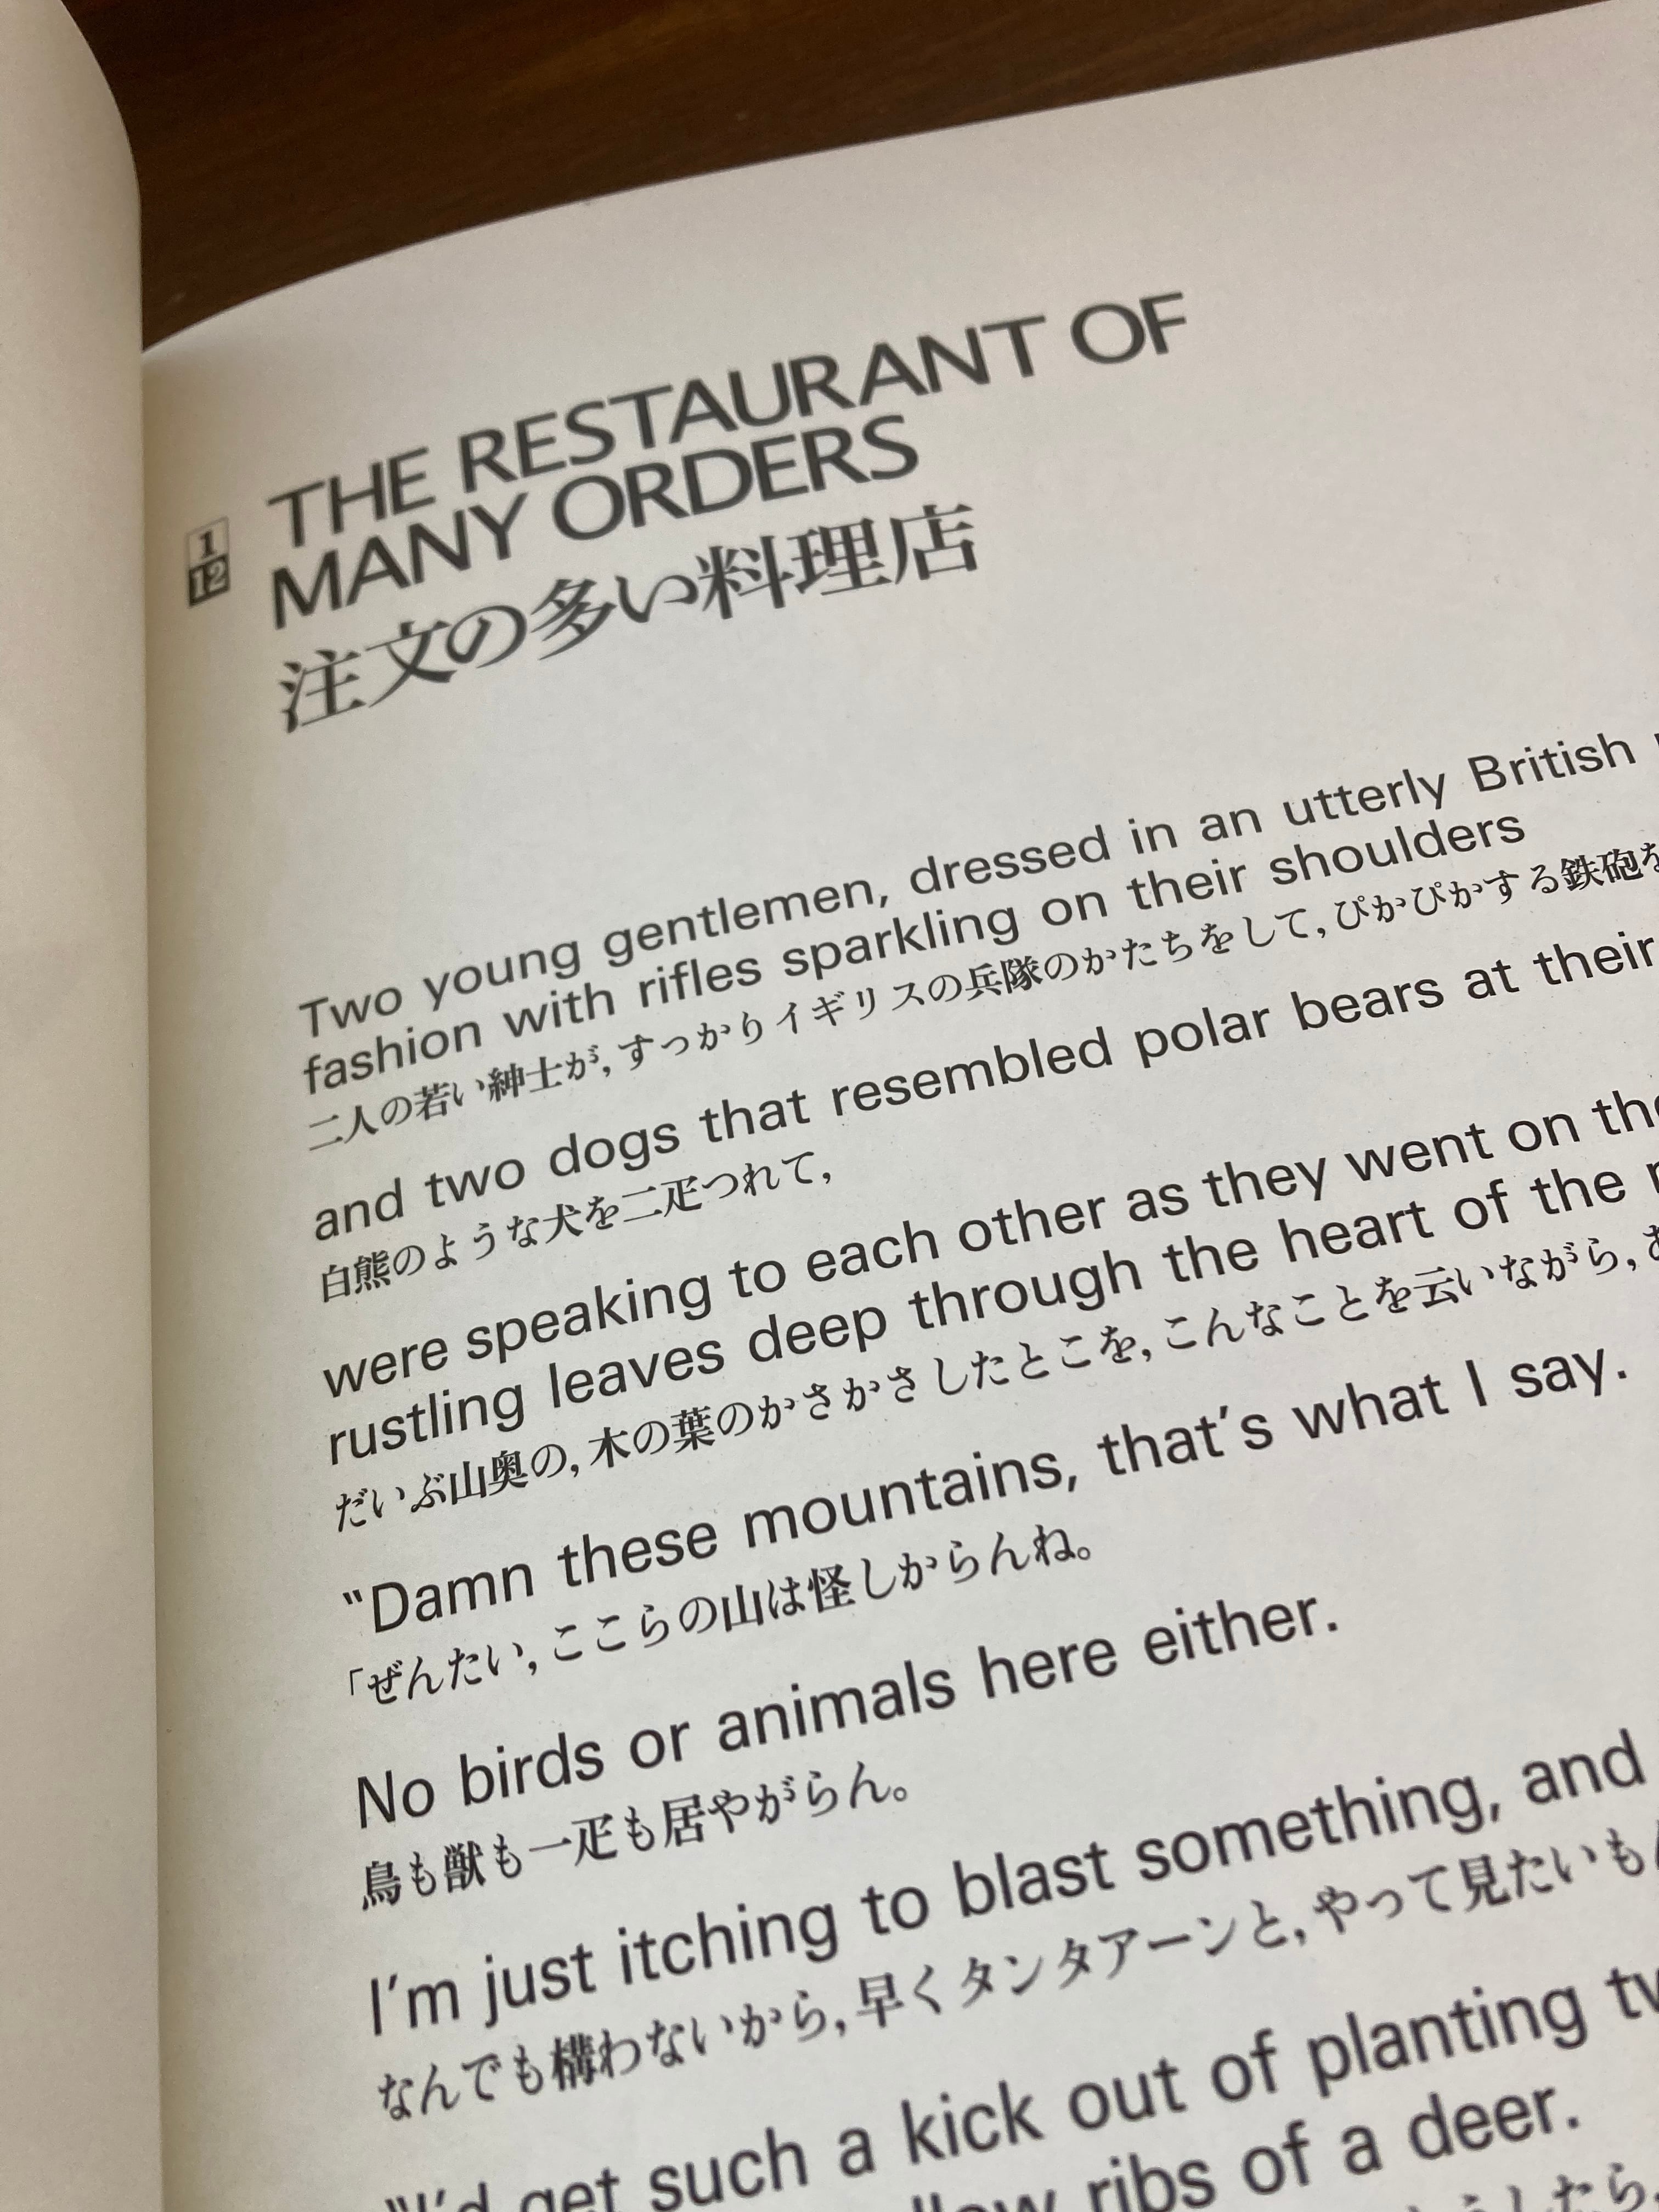 THE RESTAURANT OF MANY ORDERS -宮沢賢治　注文の多い料理店